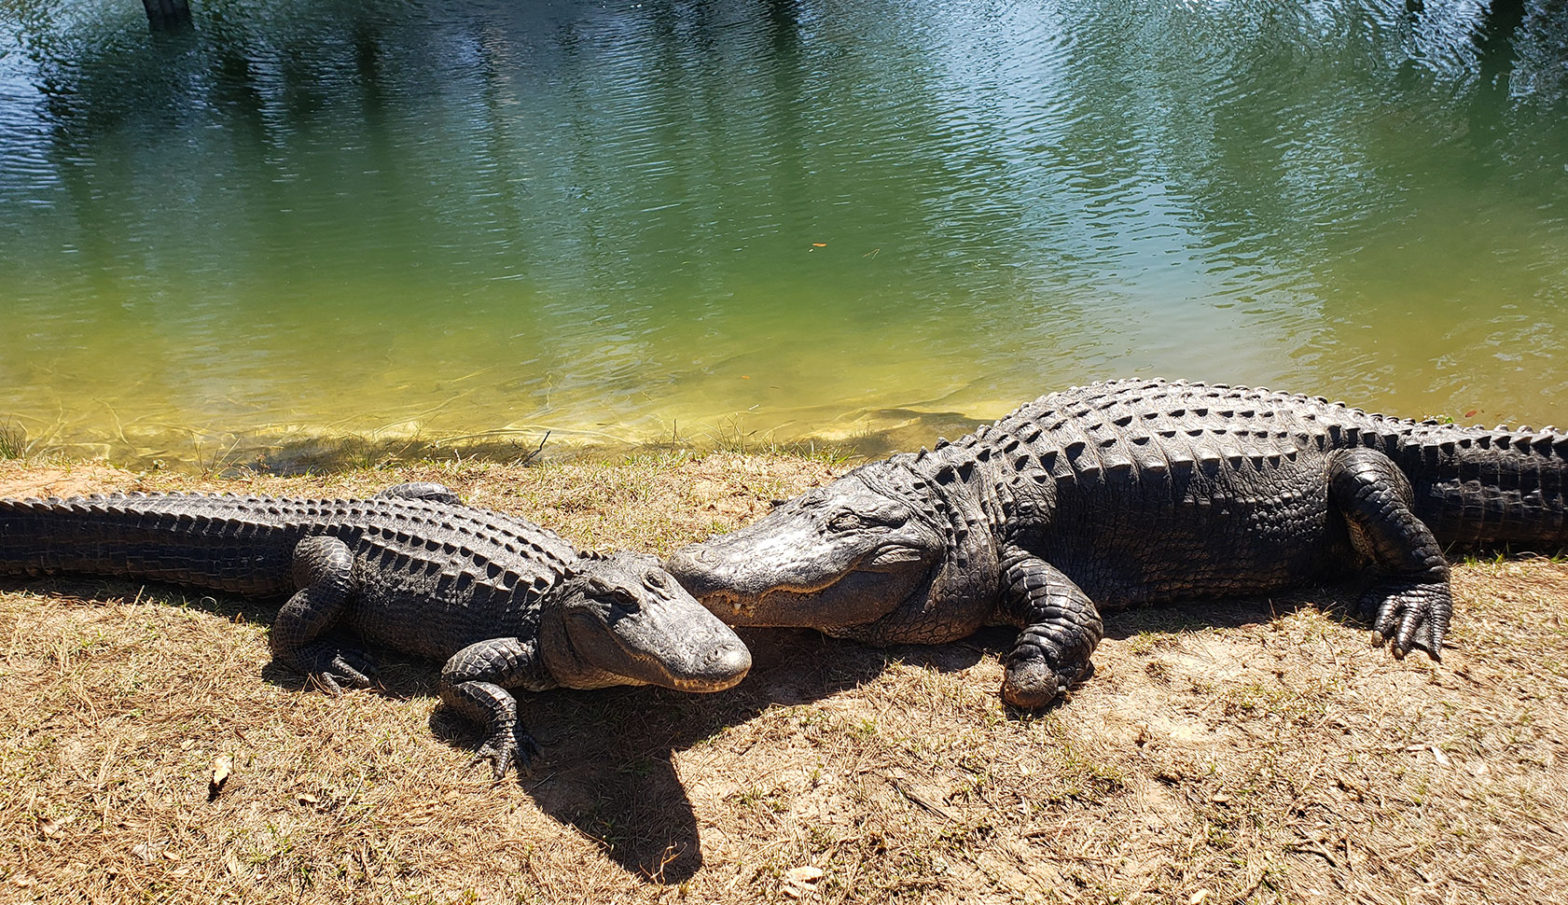 two alligators on the bank of a pond